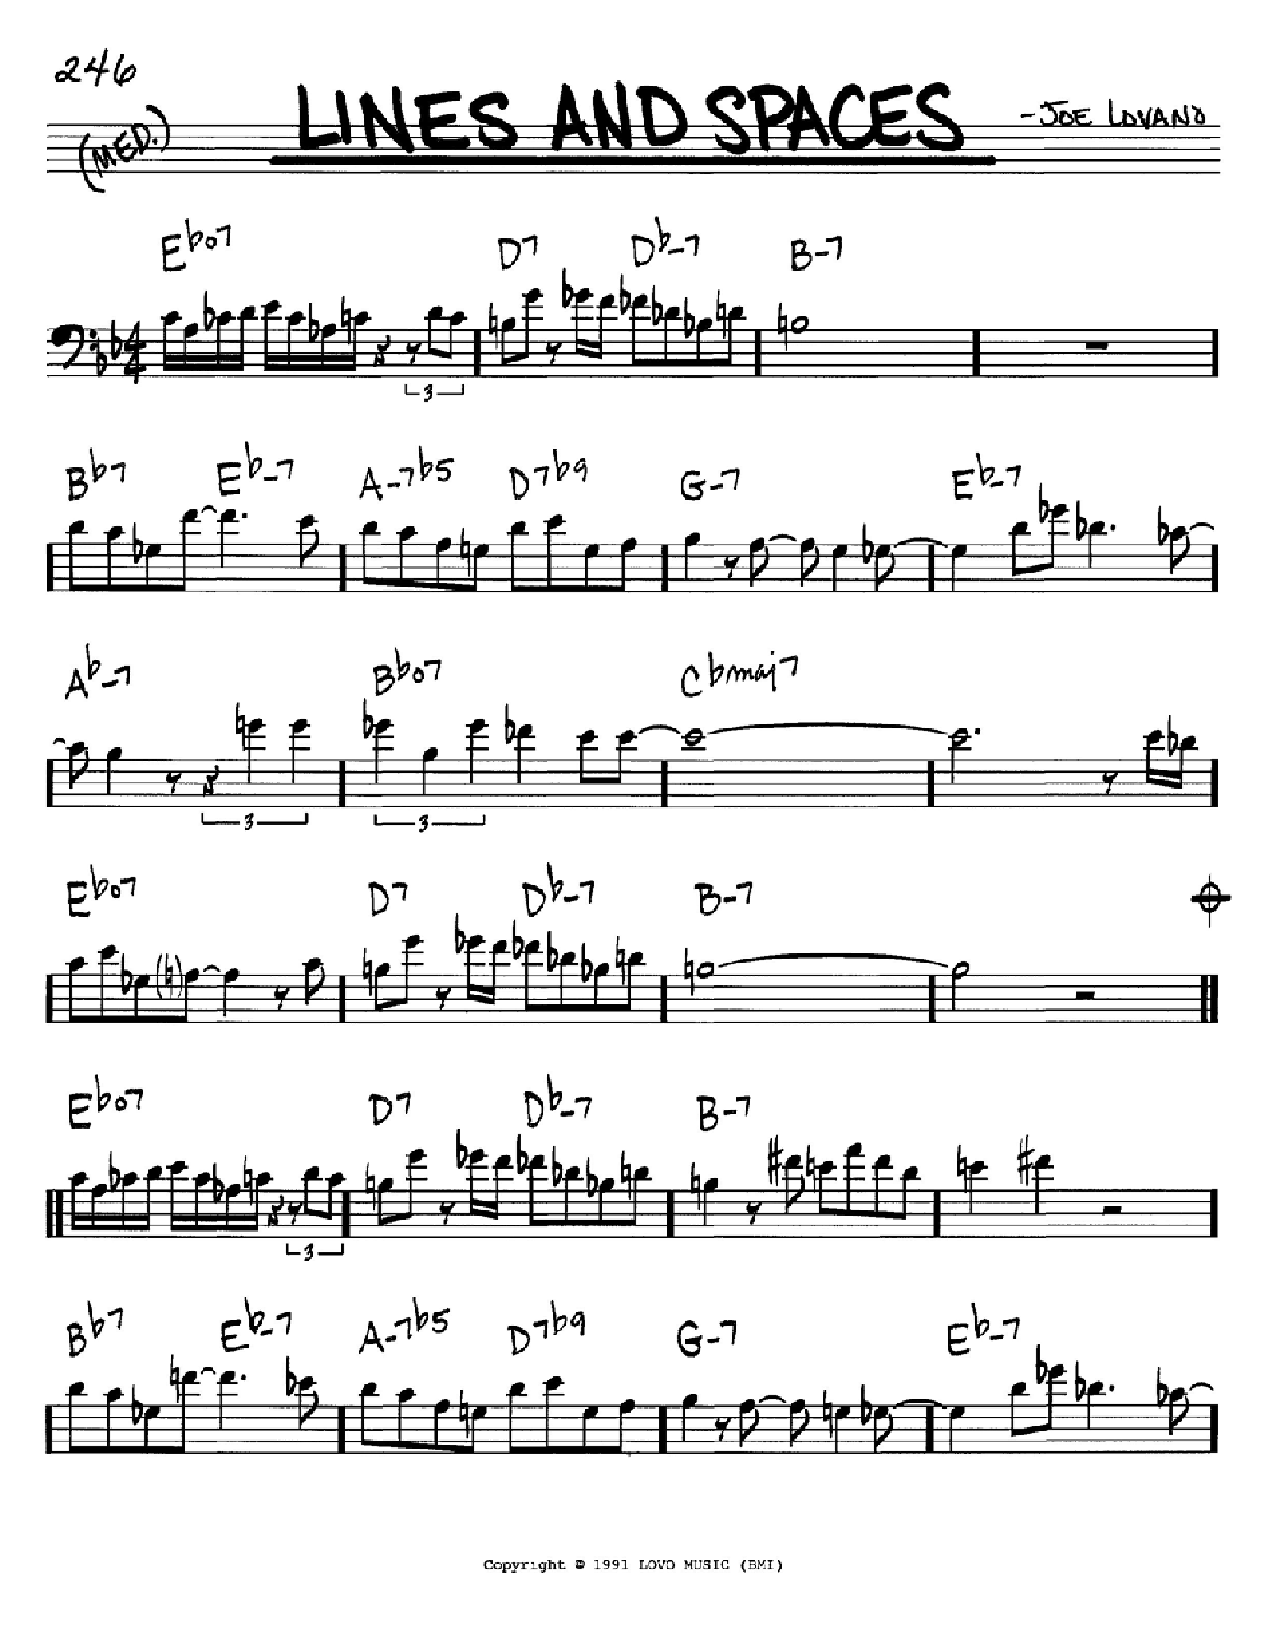 Download Joe Lovano Lines And Spaces Sheet Music